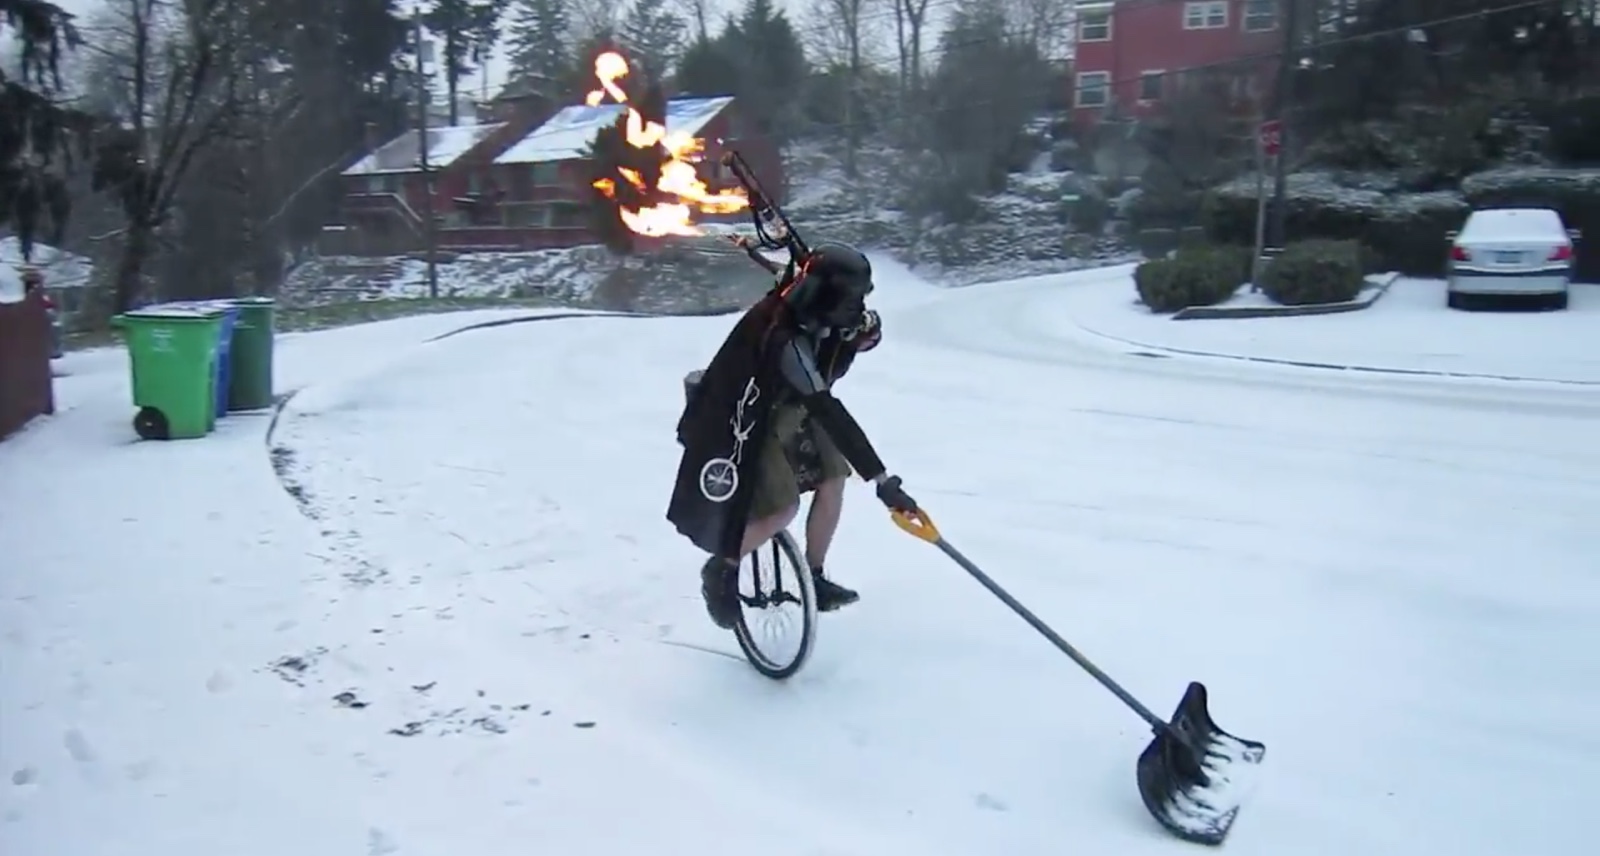 Man plays flaming bagpipes while dressed as Darth Vader riding a unicycle